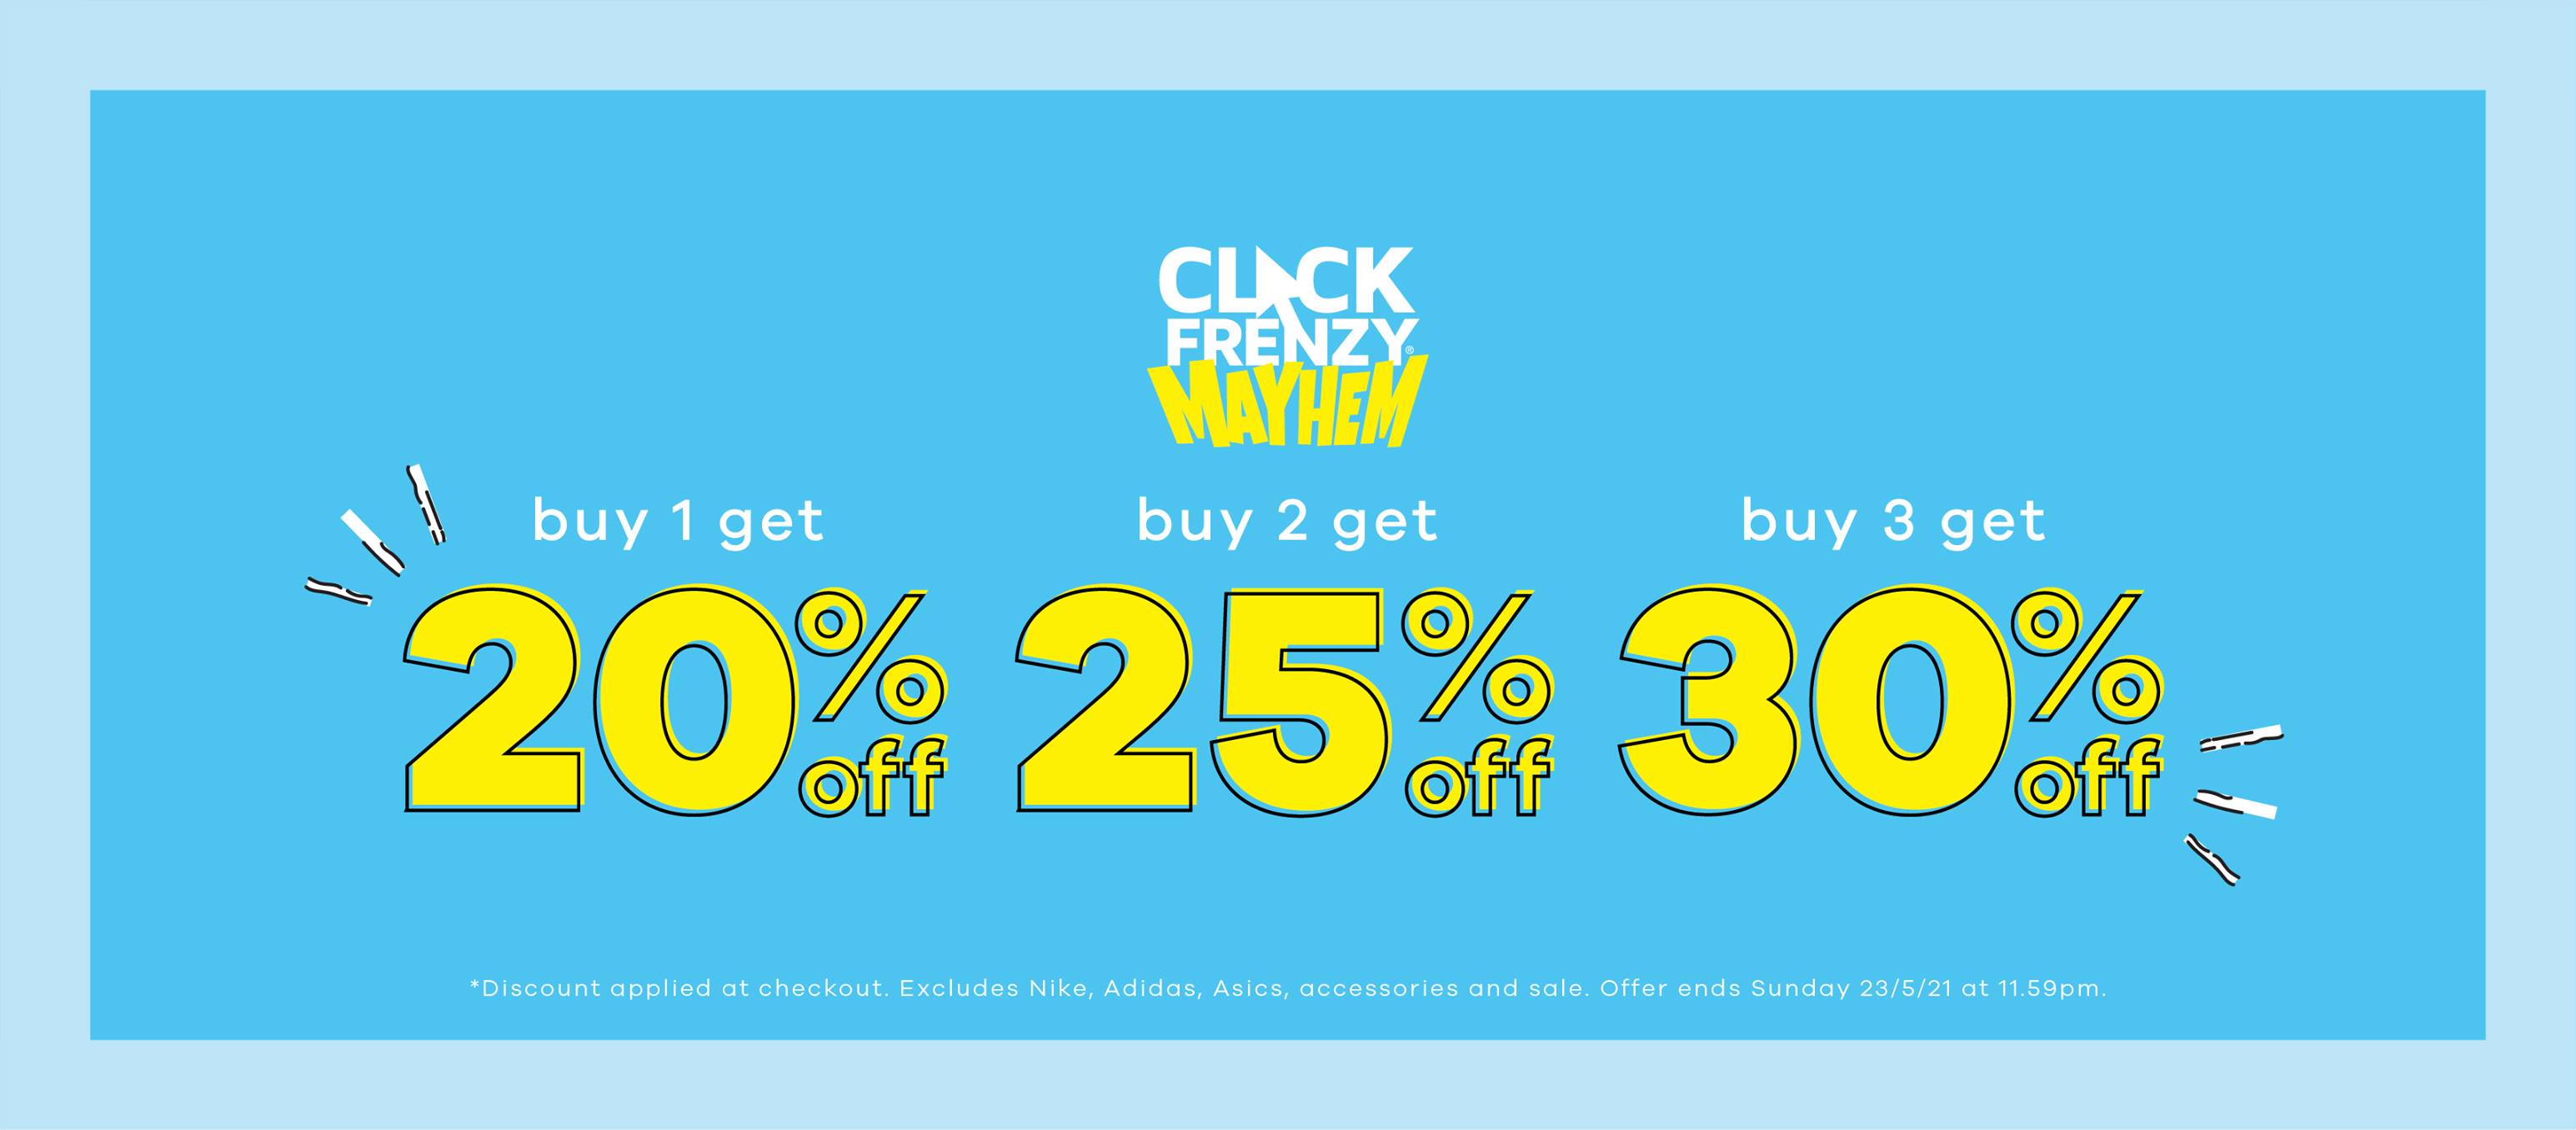 Save up to 30% OFF on Click Frenzy sale